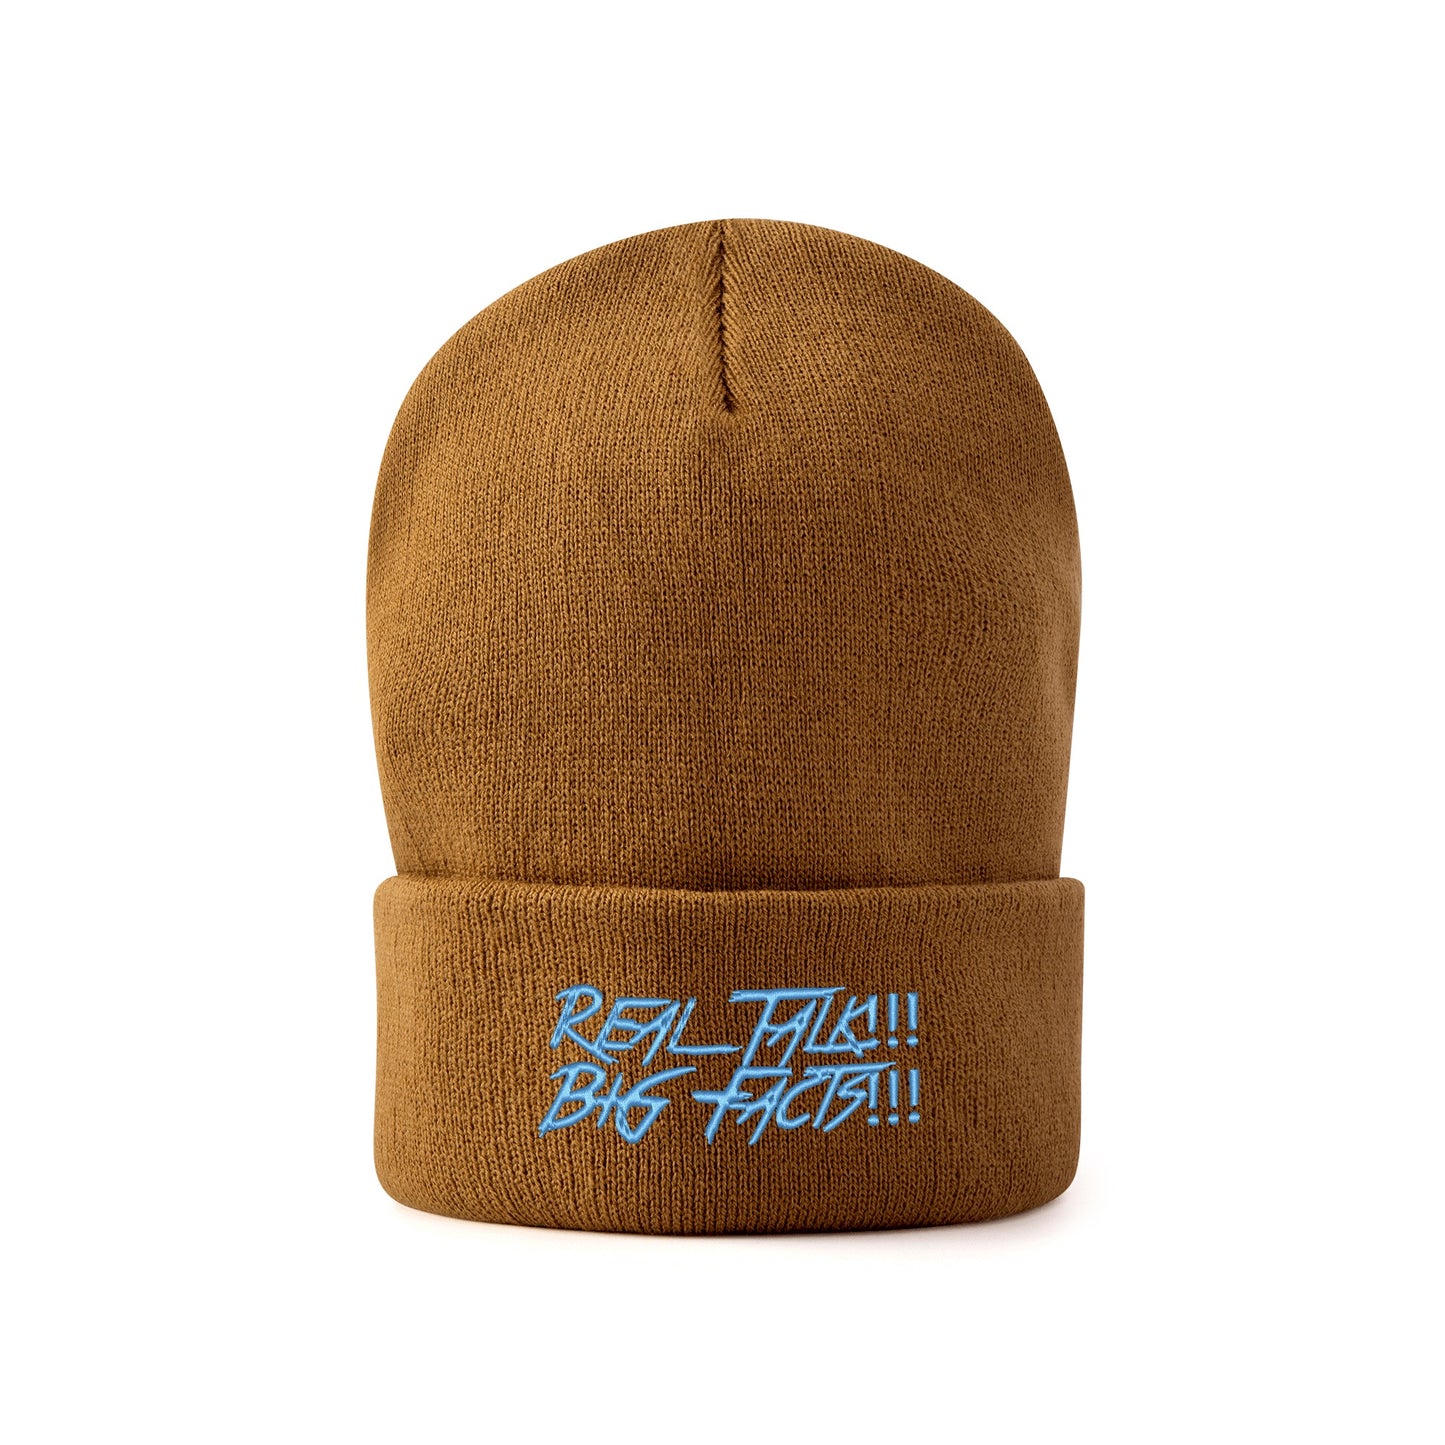 REAL TALK!!! BIG FACTS!!! Embroidered Knitted Hat